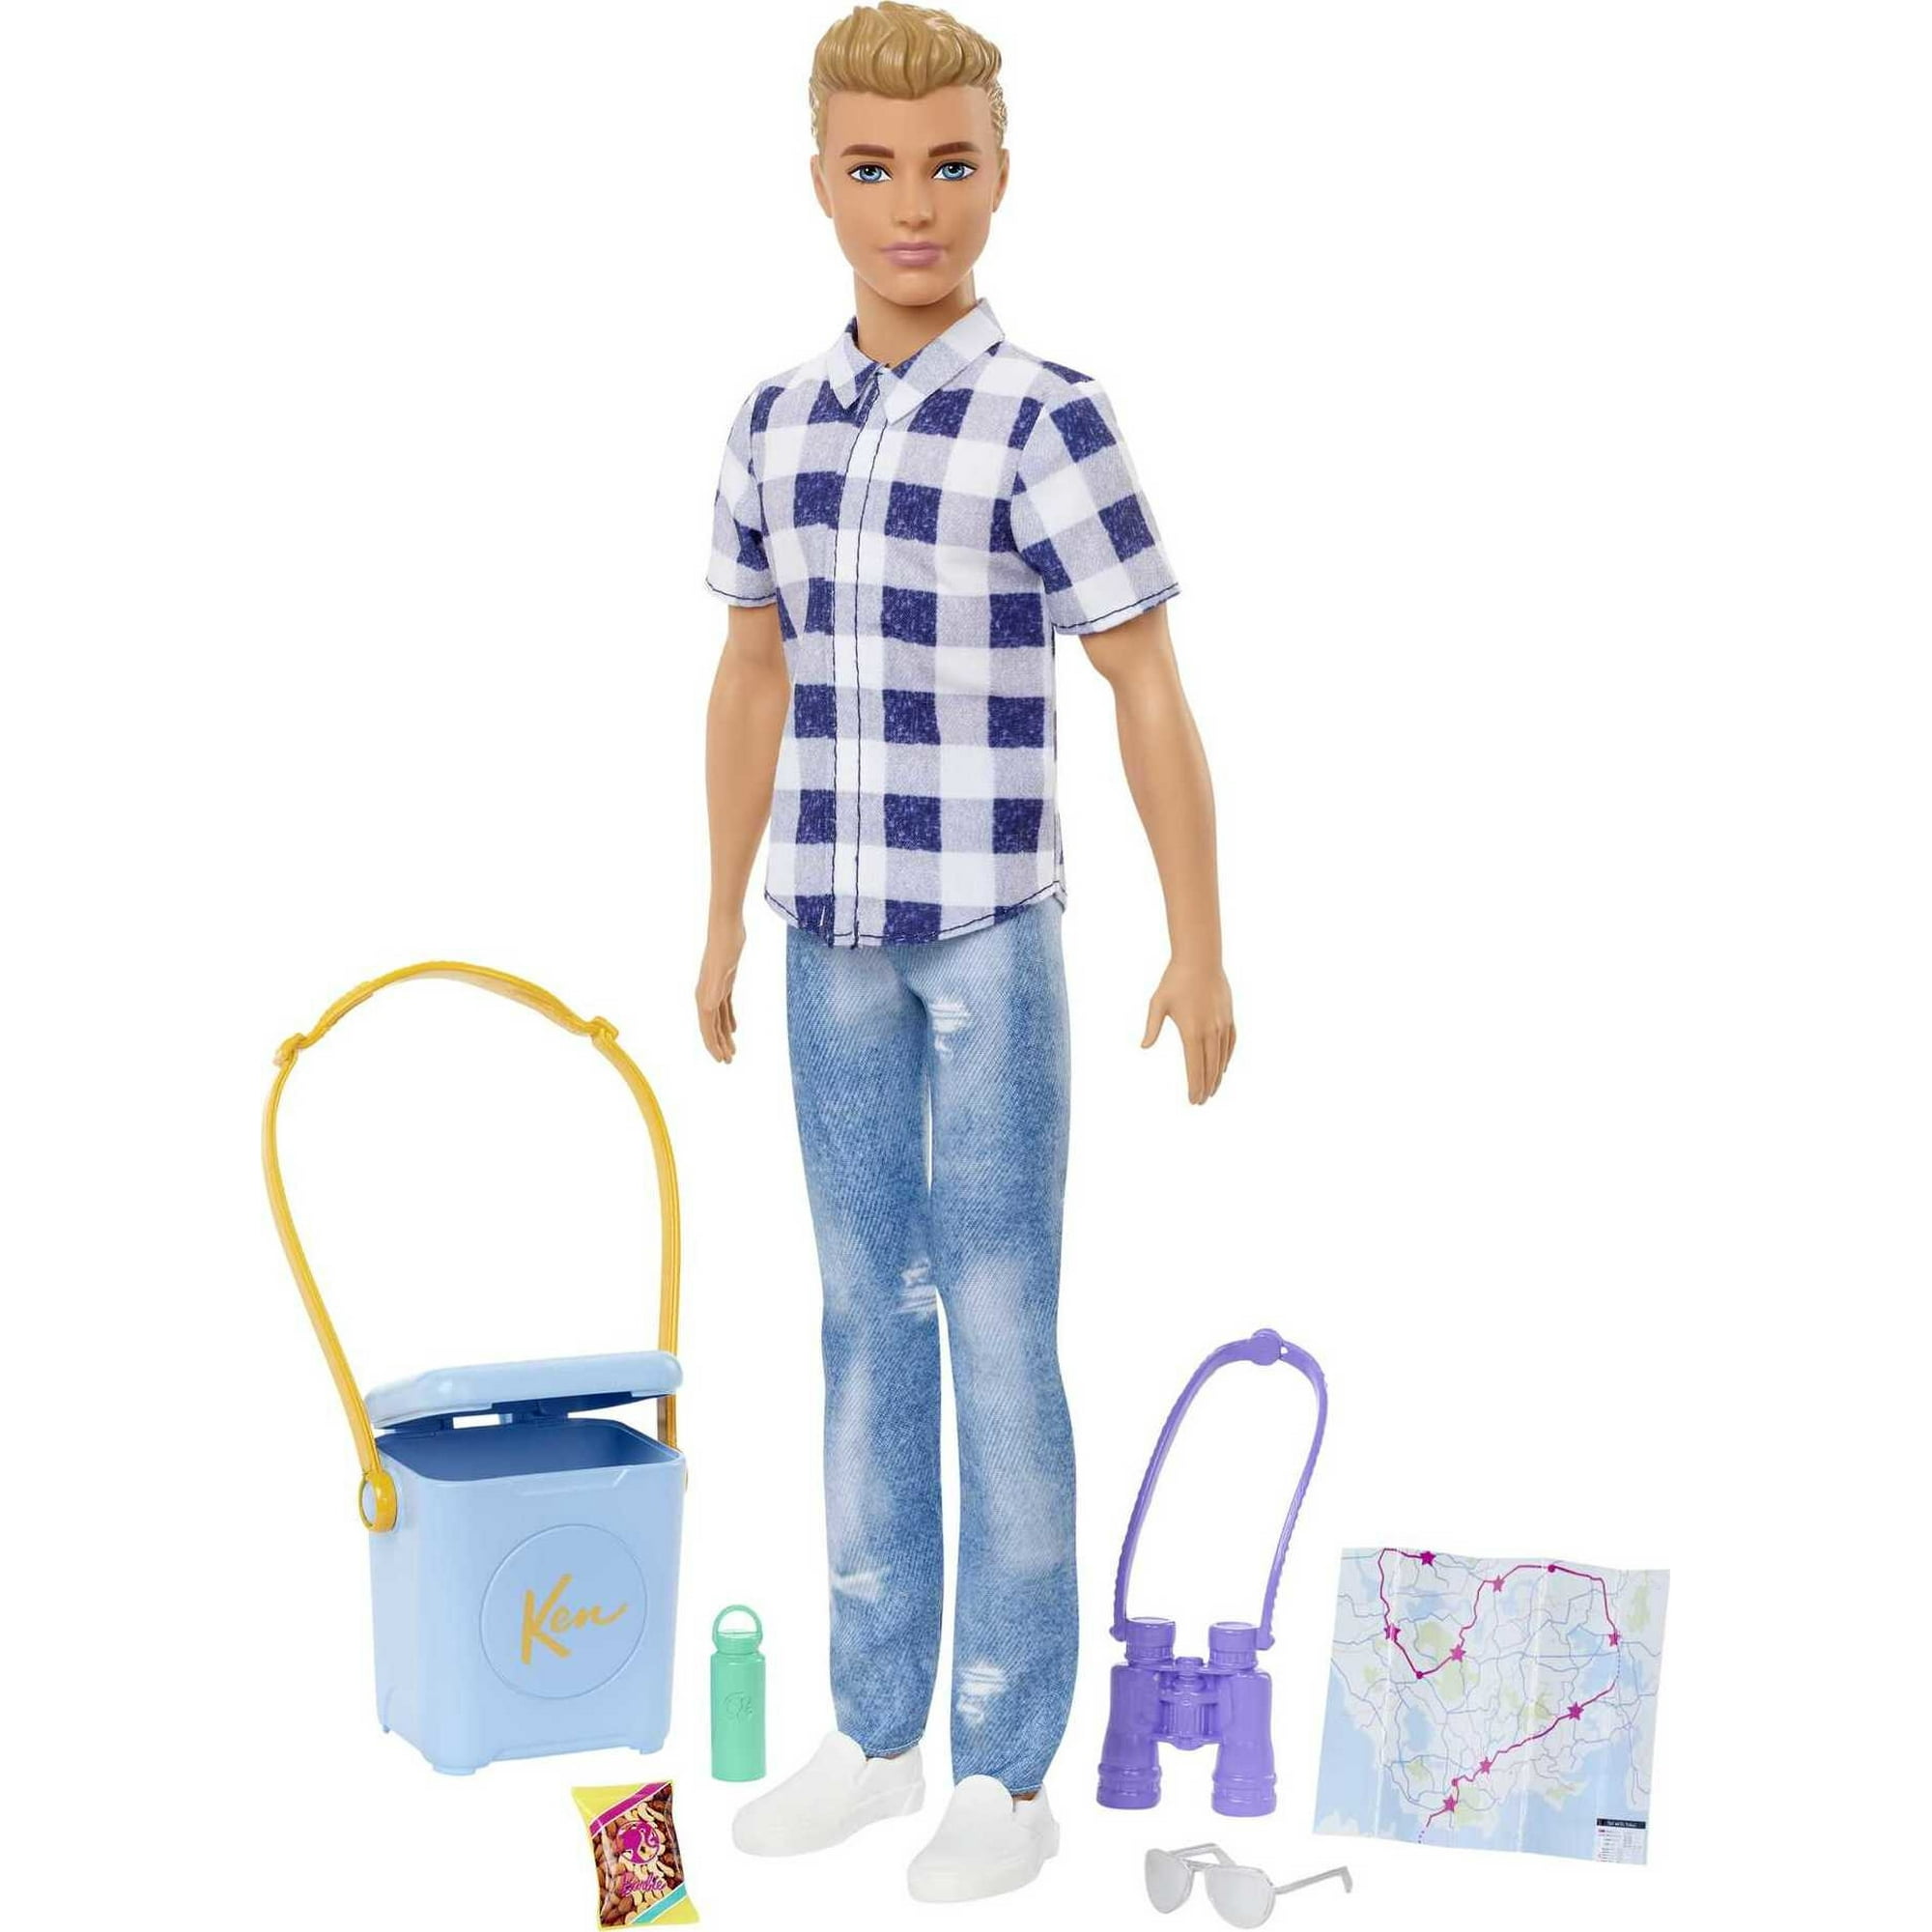 Barbie It Takes Two Ken & Camping Accessories, Blonde Doll with Blue Eyes Wearing Plaid Shirt - Walmart.com